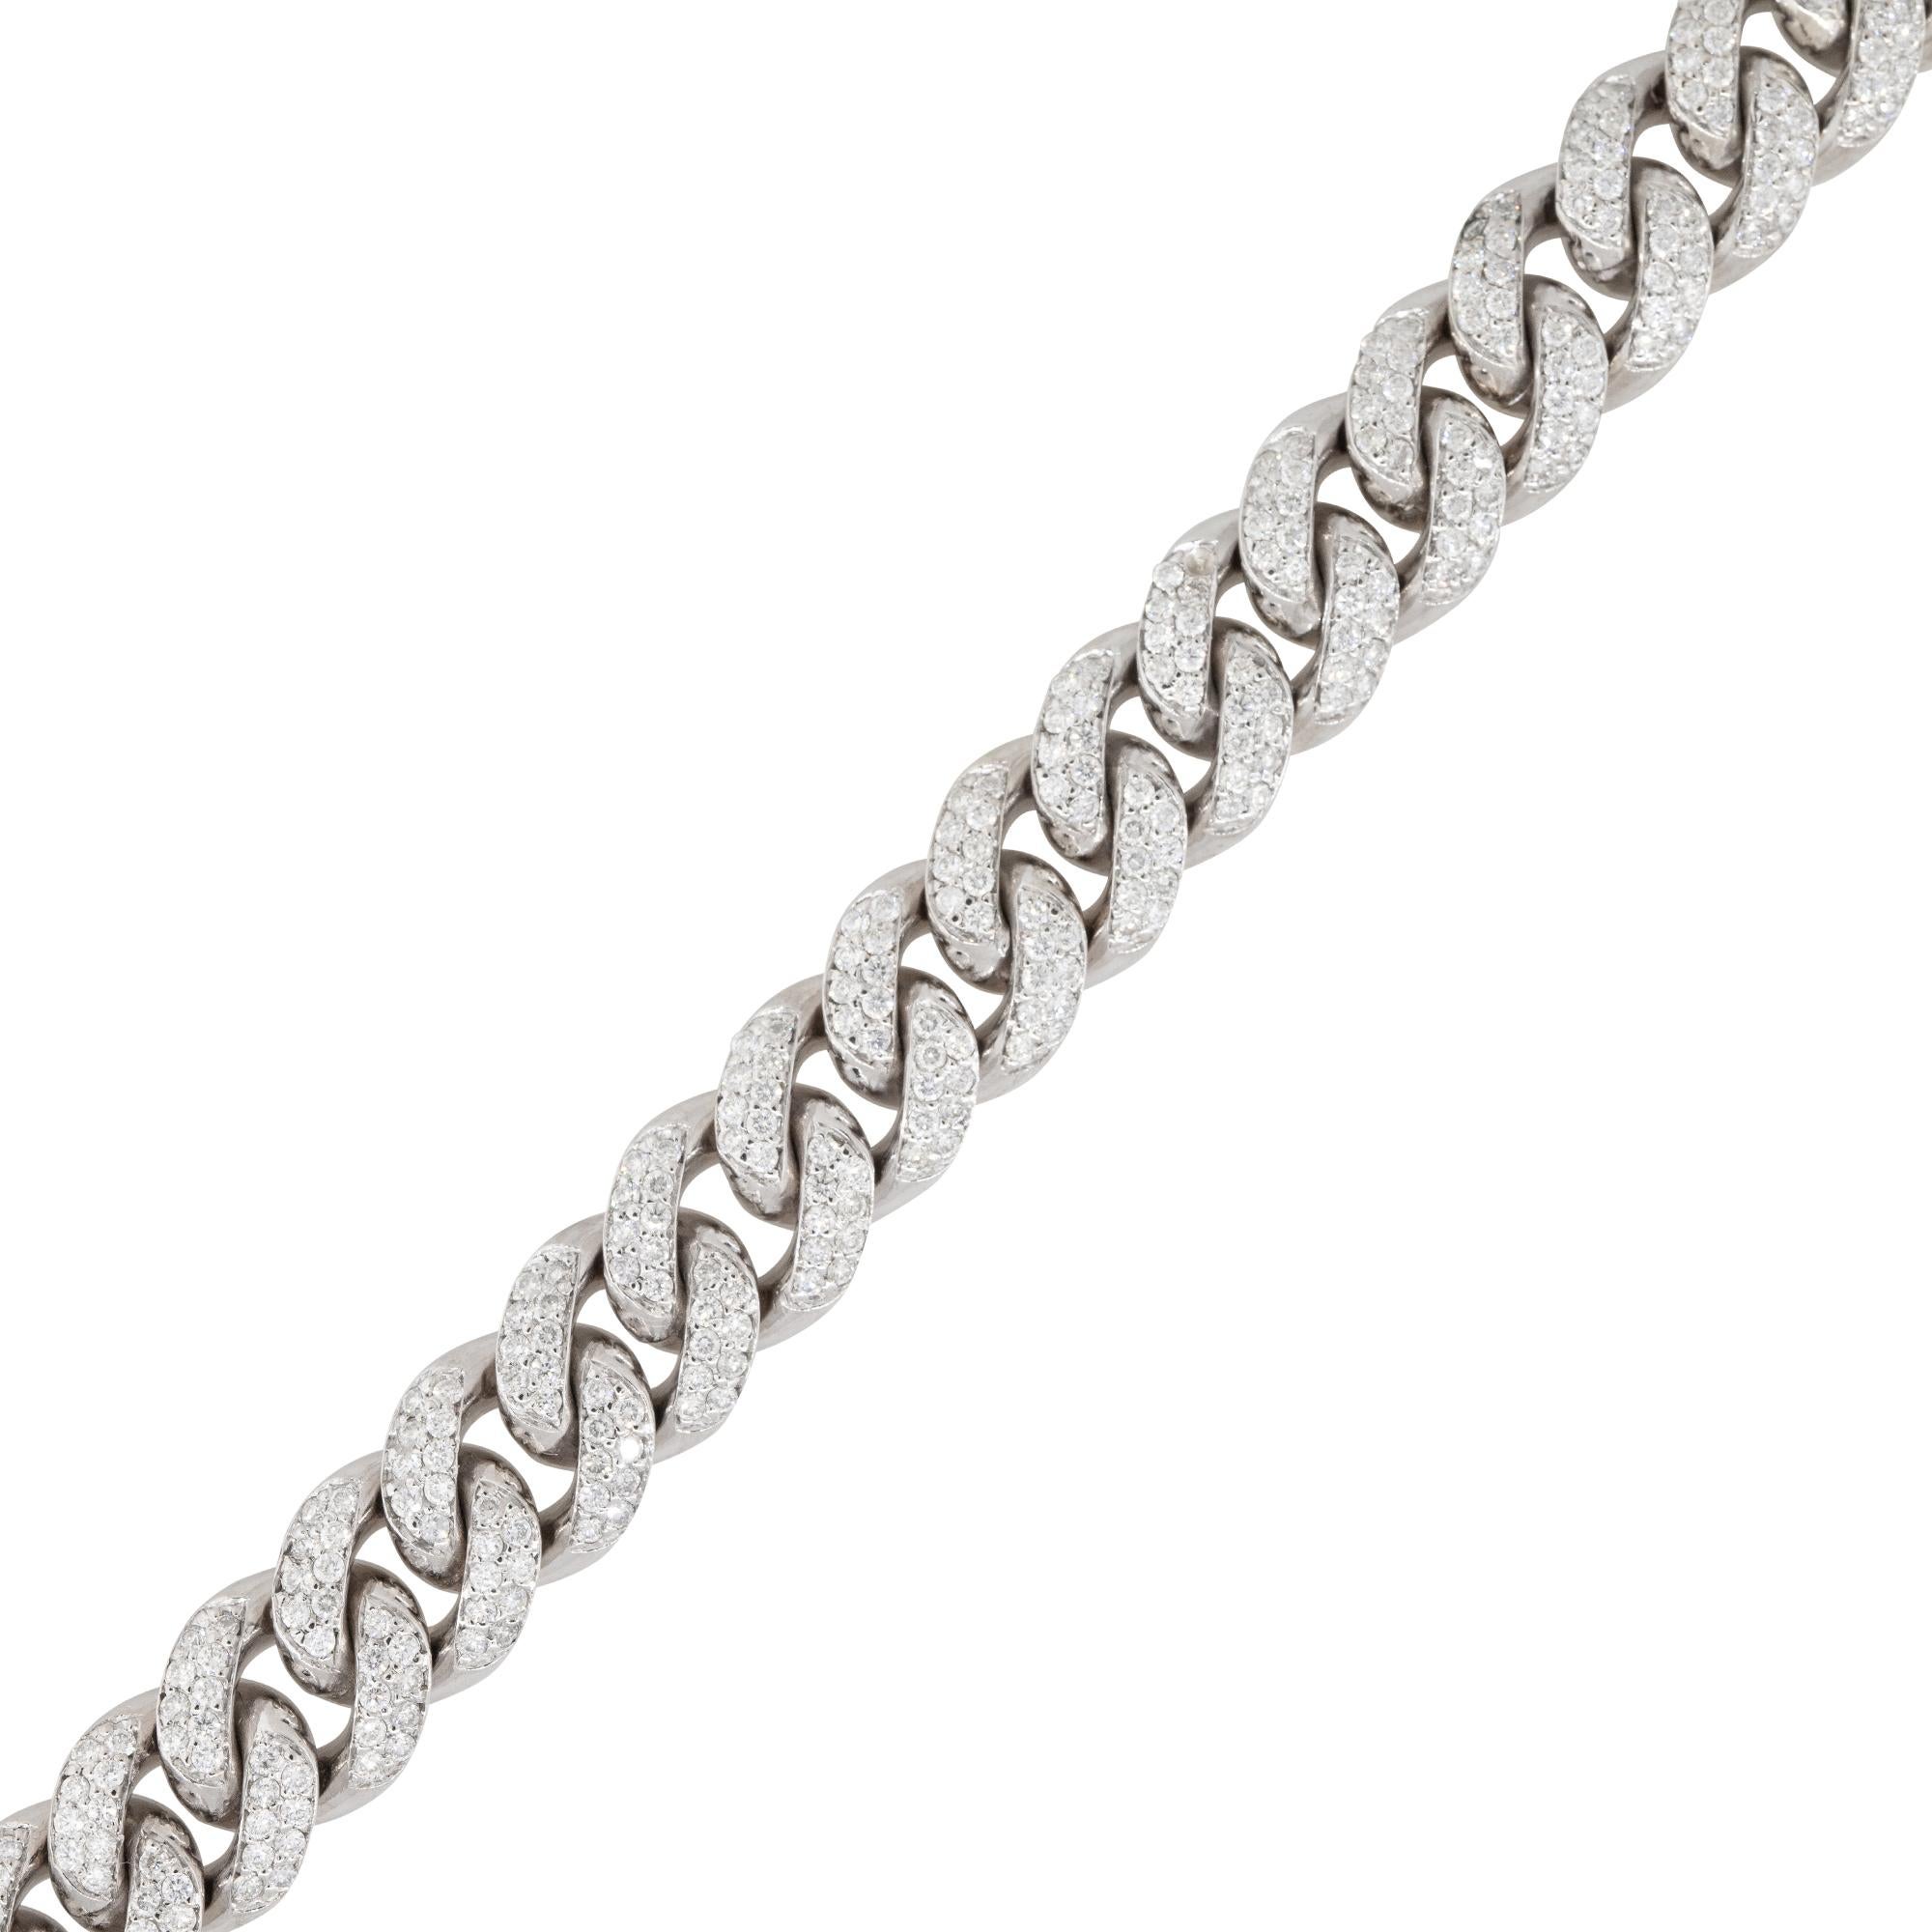 This 6.0 carat pave diamond Cuban link bracelet features a classic Cuban link design, which is known for its interlocking pattern of thick, flat, interlocking links that create a bold and substantial look. The bracelet is made of high-quality 14k